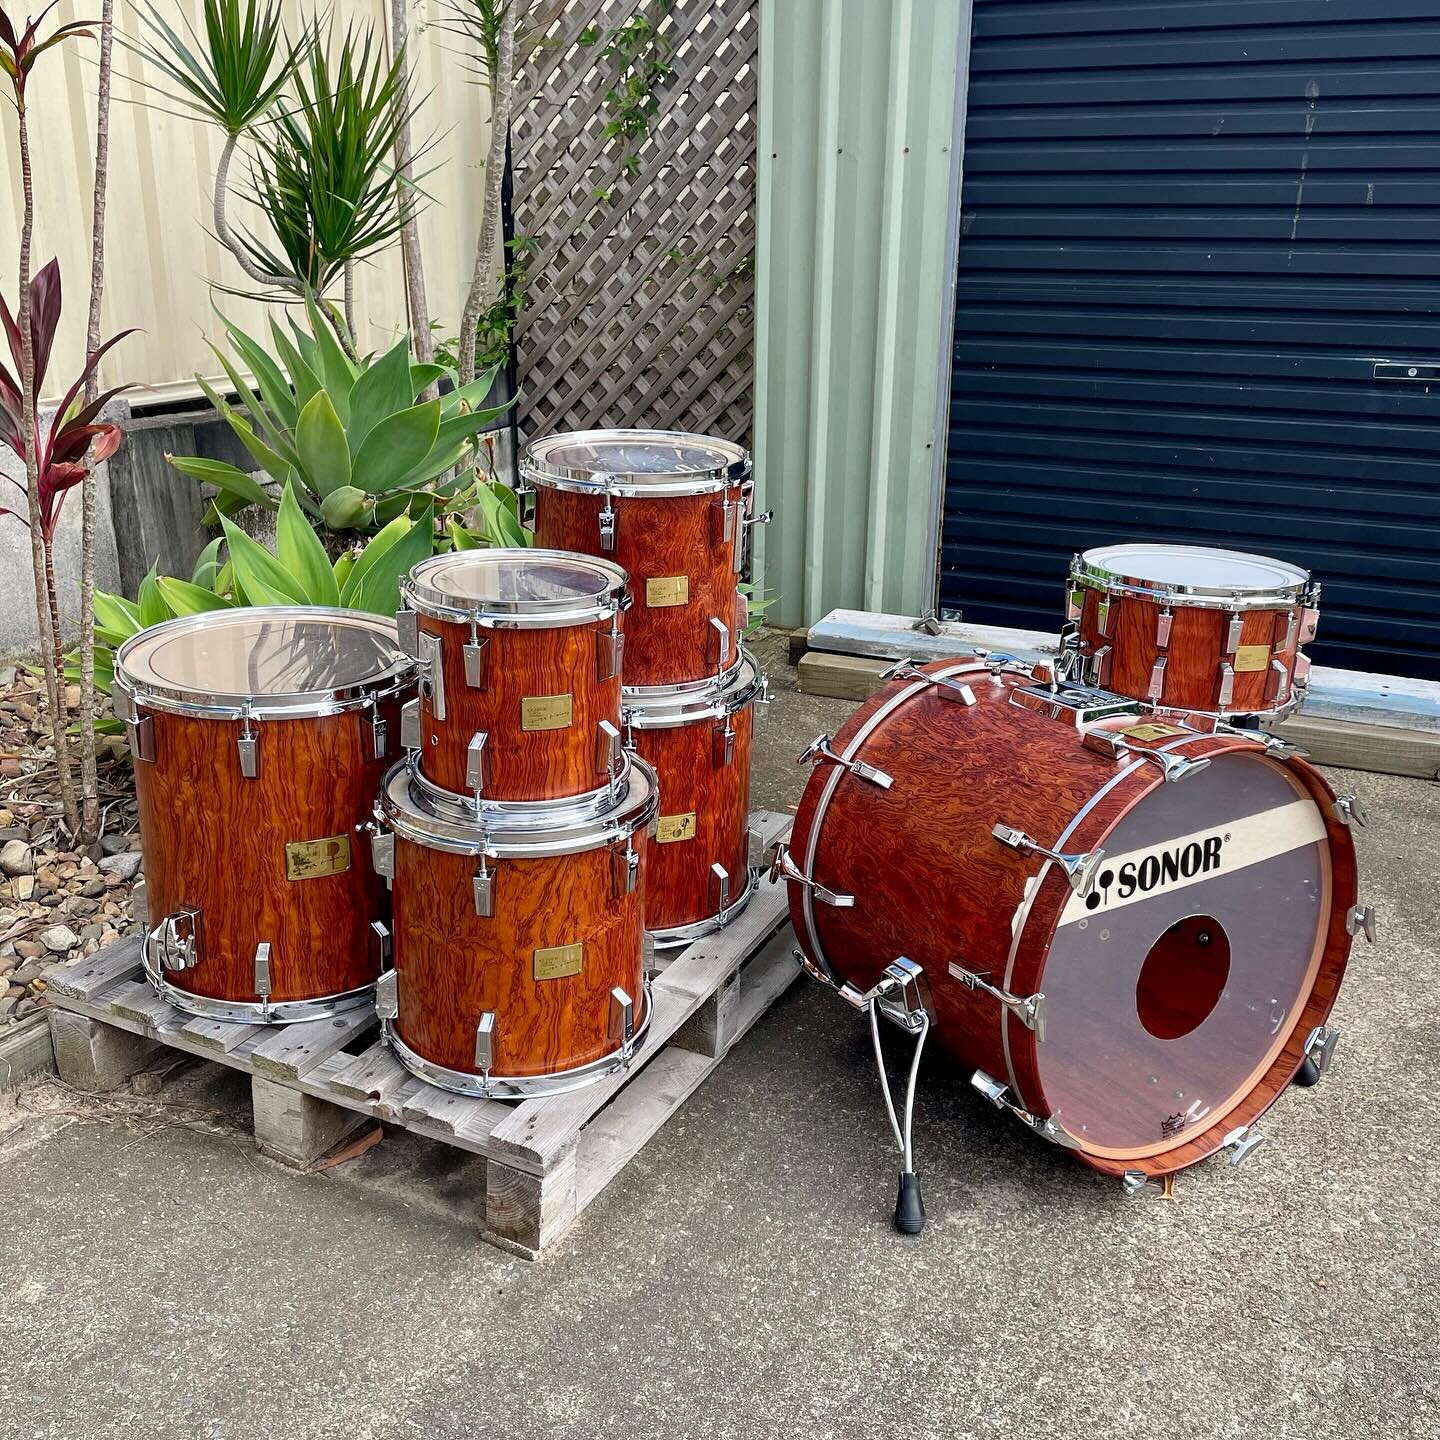 Sonor Horst Link Signature mid-late 80&rsquo;s &ldquo;heavy&rdquo; kit 
12 ply Beech wood with African Bubinga inner/outer vertical ply. 
- 22&rdquo;x18&rdquo;, 10&rdquo;x10&rdquo;, 12&rdquo;x12&rdquo;, 13&rdquo;x13&rdquo;, 14&rdquo;x14&rdquo;, 15&rd